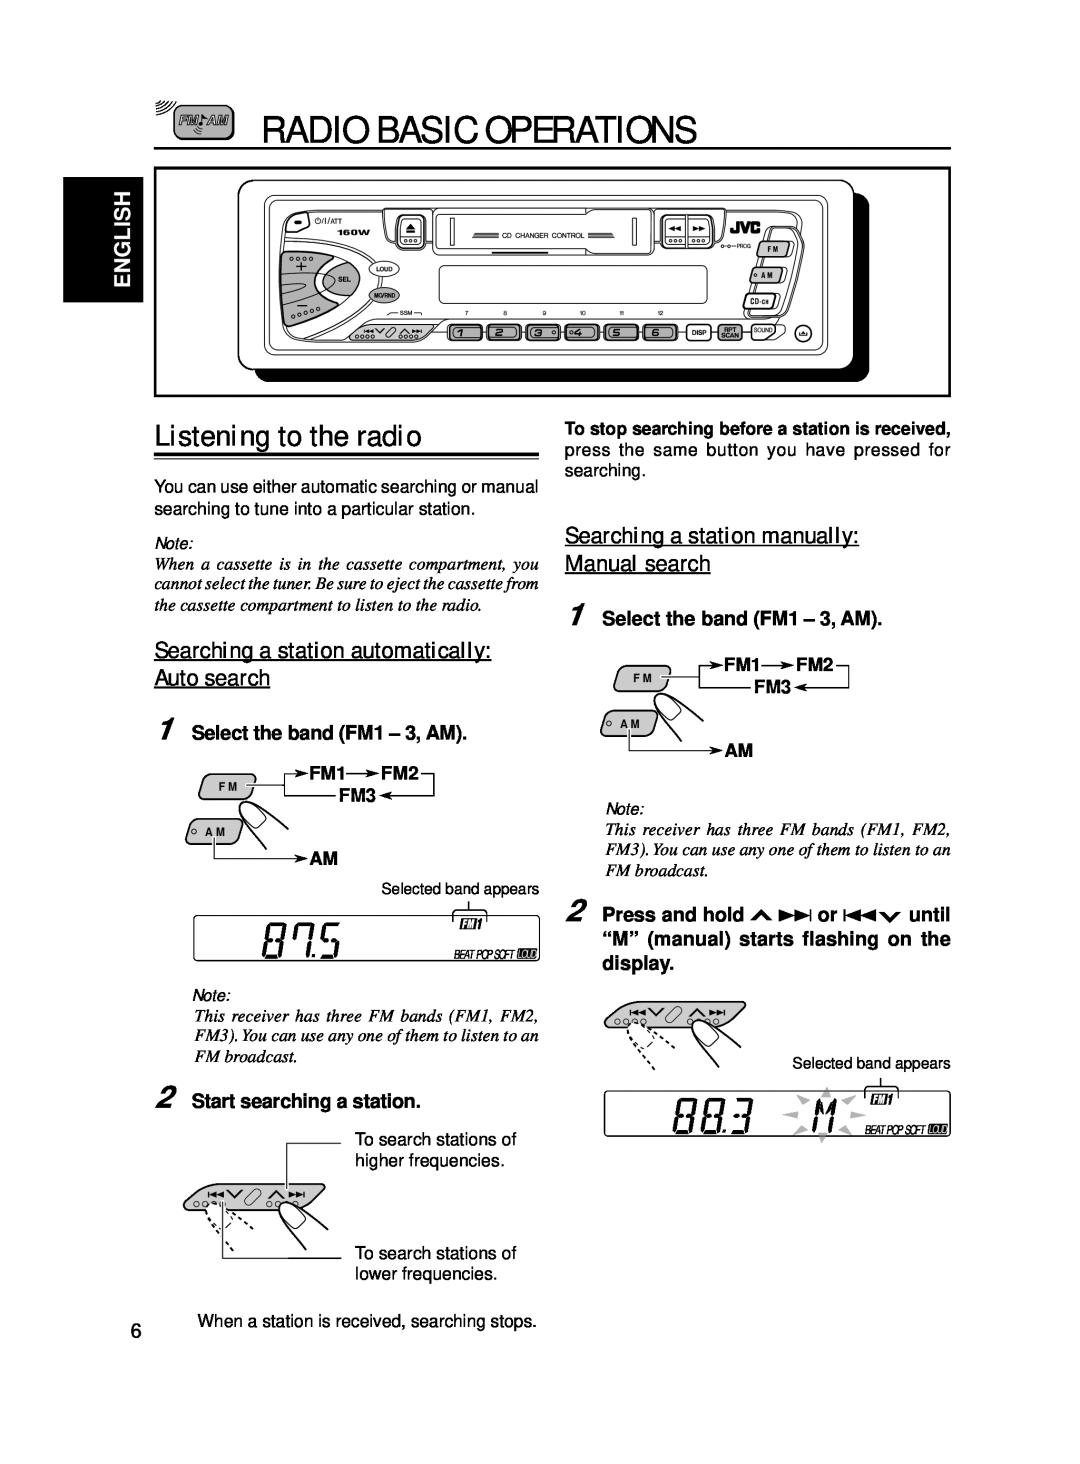 JVC KS-FX210 manual Radio Basic Operations, Listening to the radio, Searching a station automatically Auto search, English 